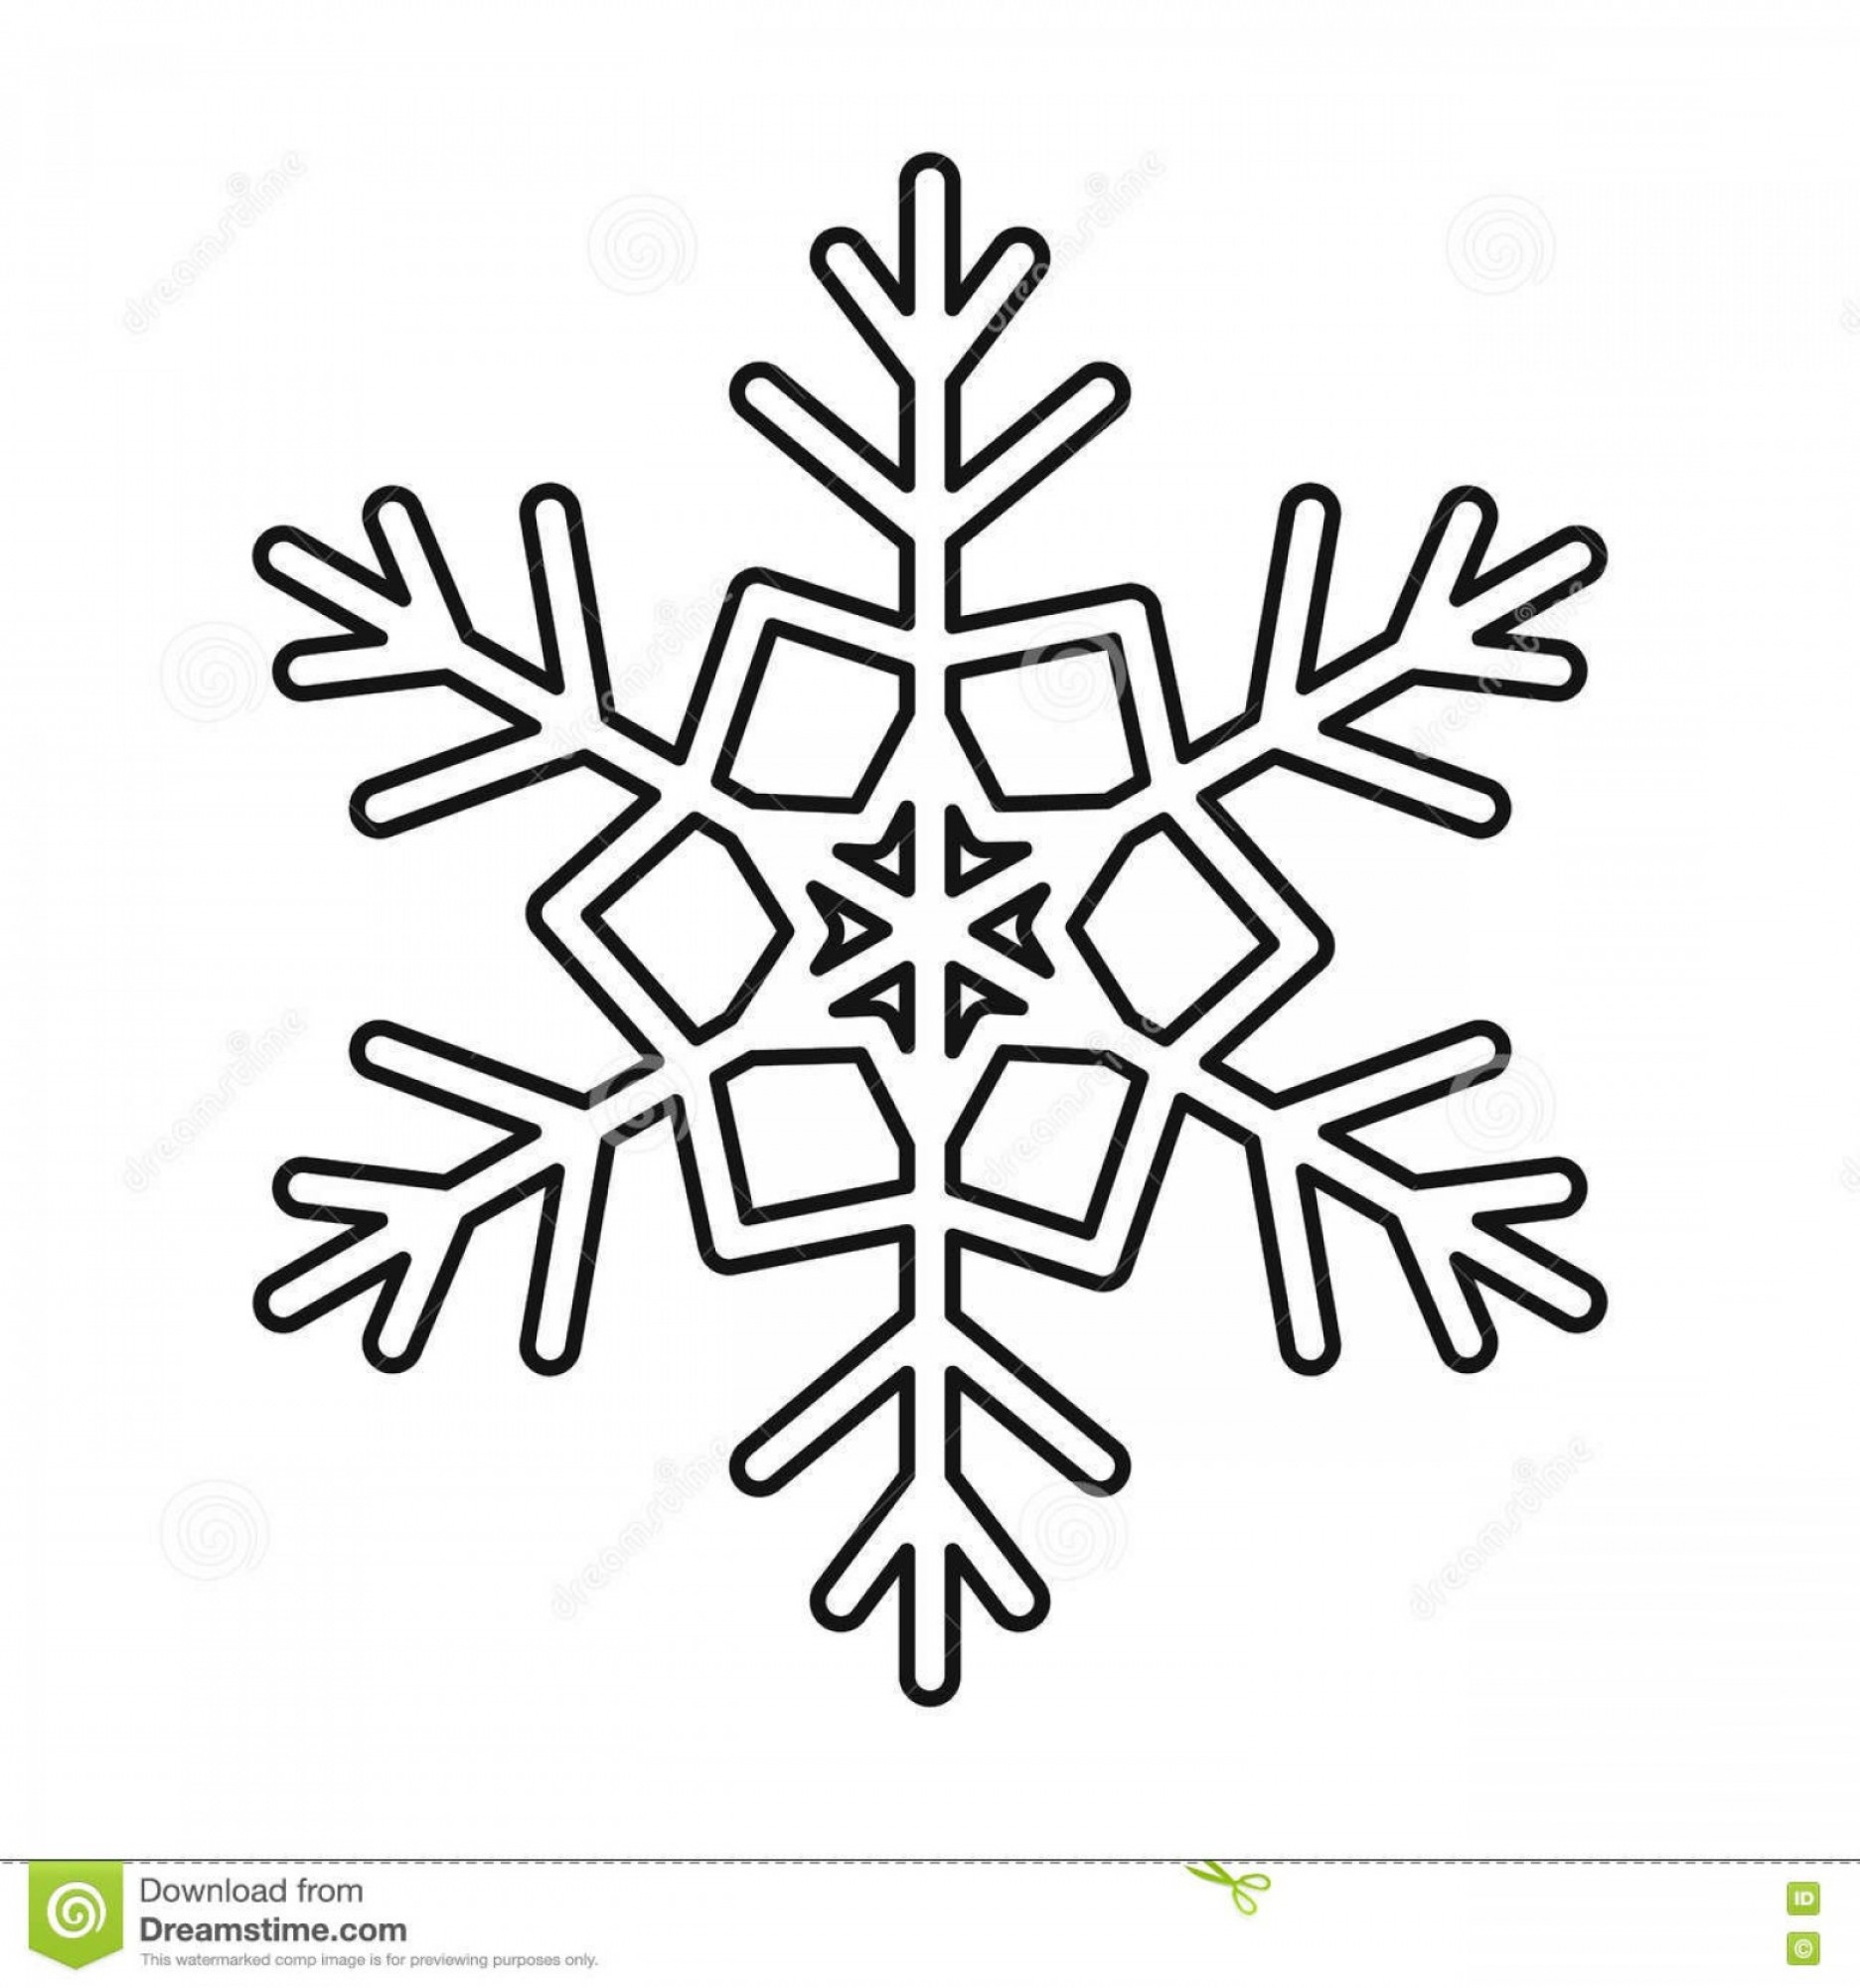 Snowflake Icon Vector at Vectorified.com | Collection of Snowflake Icon ...